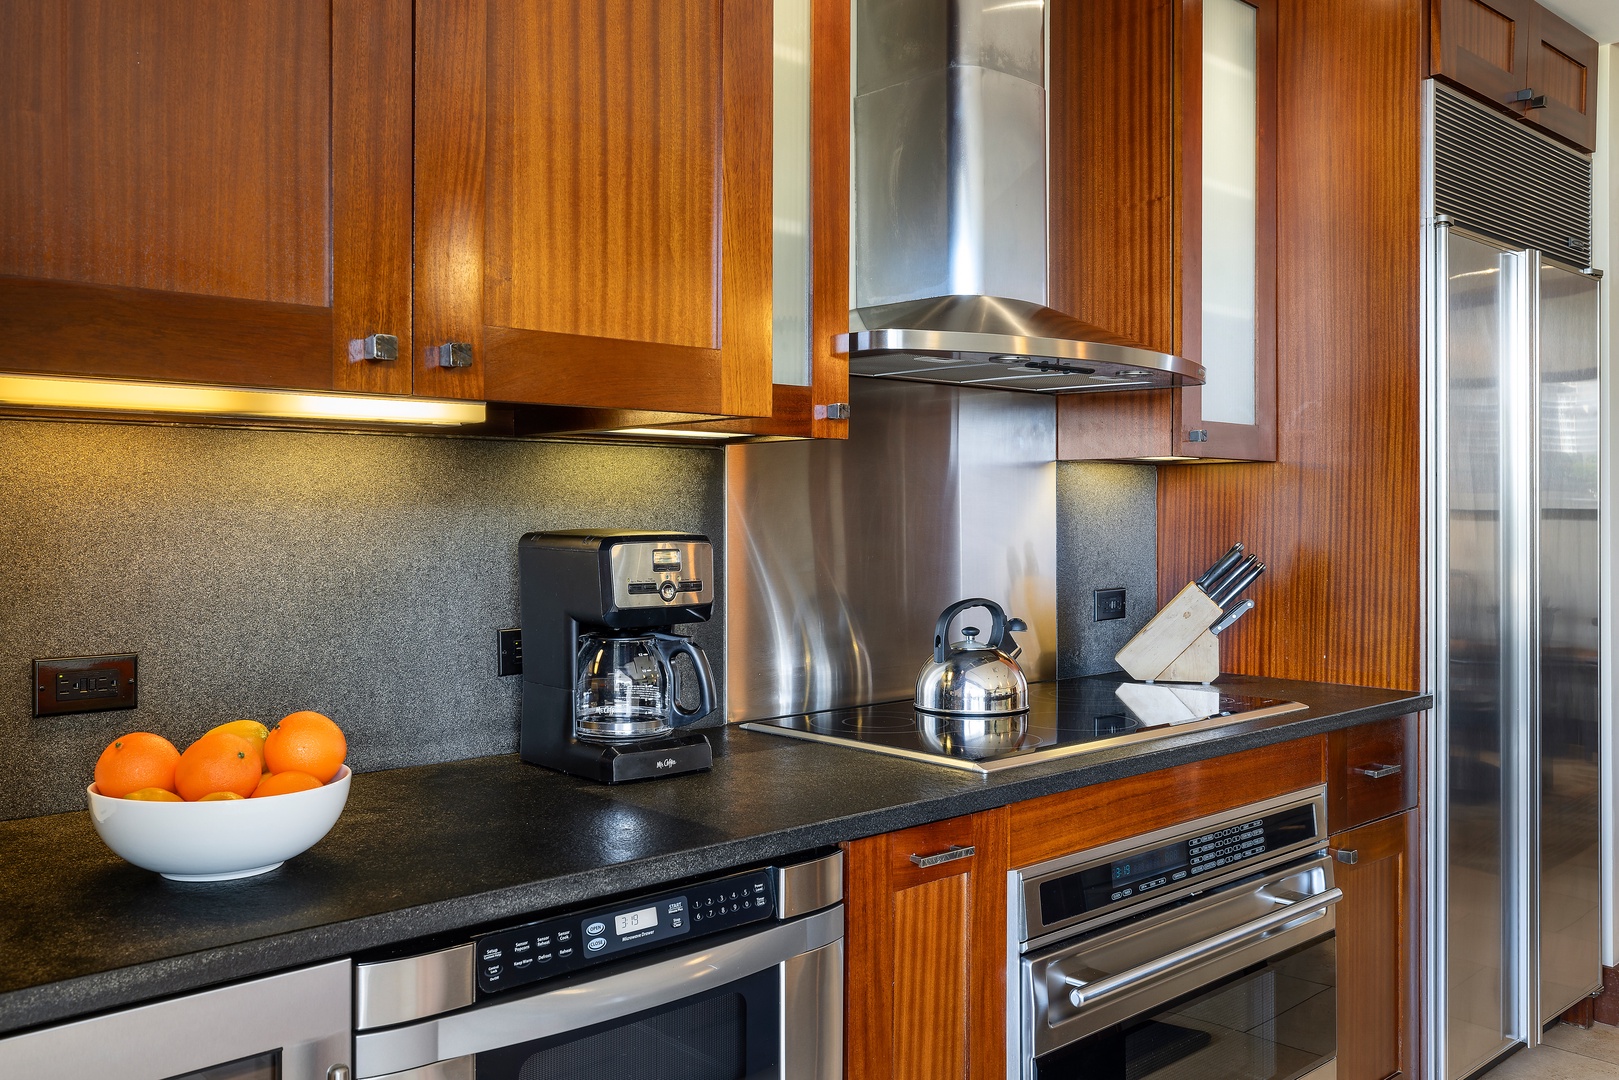 Kapolei Vacation Rentals, Ko Olina Beach Villas O414 - Fully-stocked kitchen with everything you need to whip up a delicious meal while on vacation